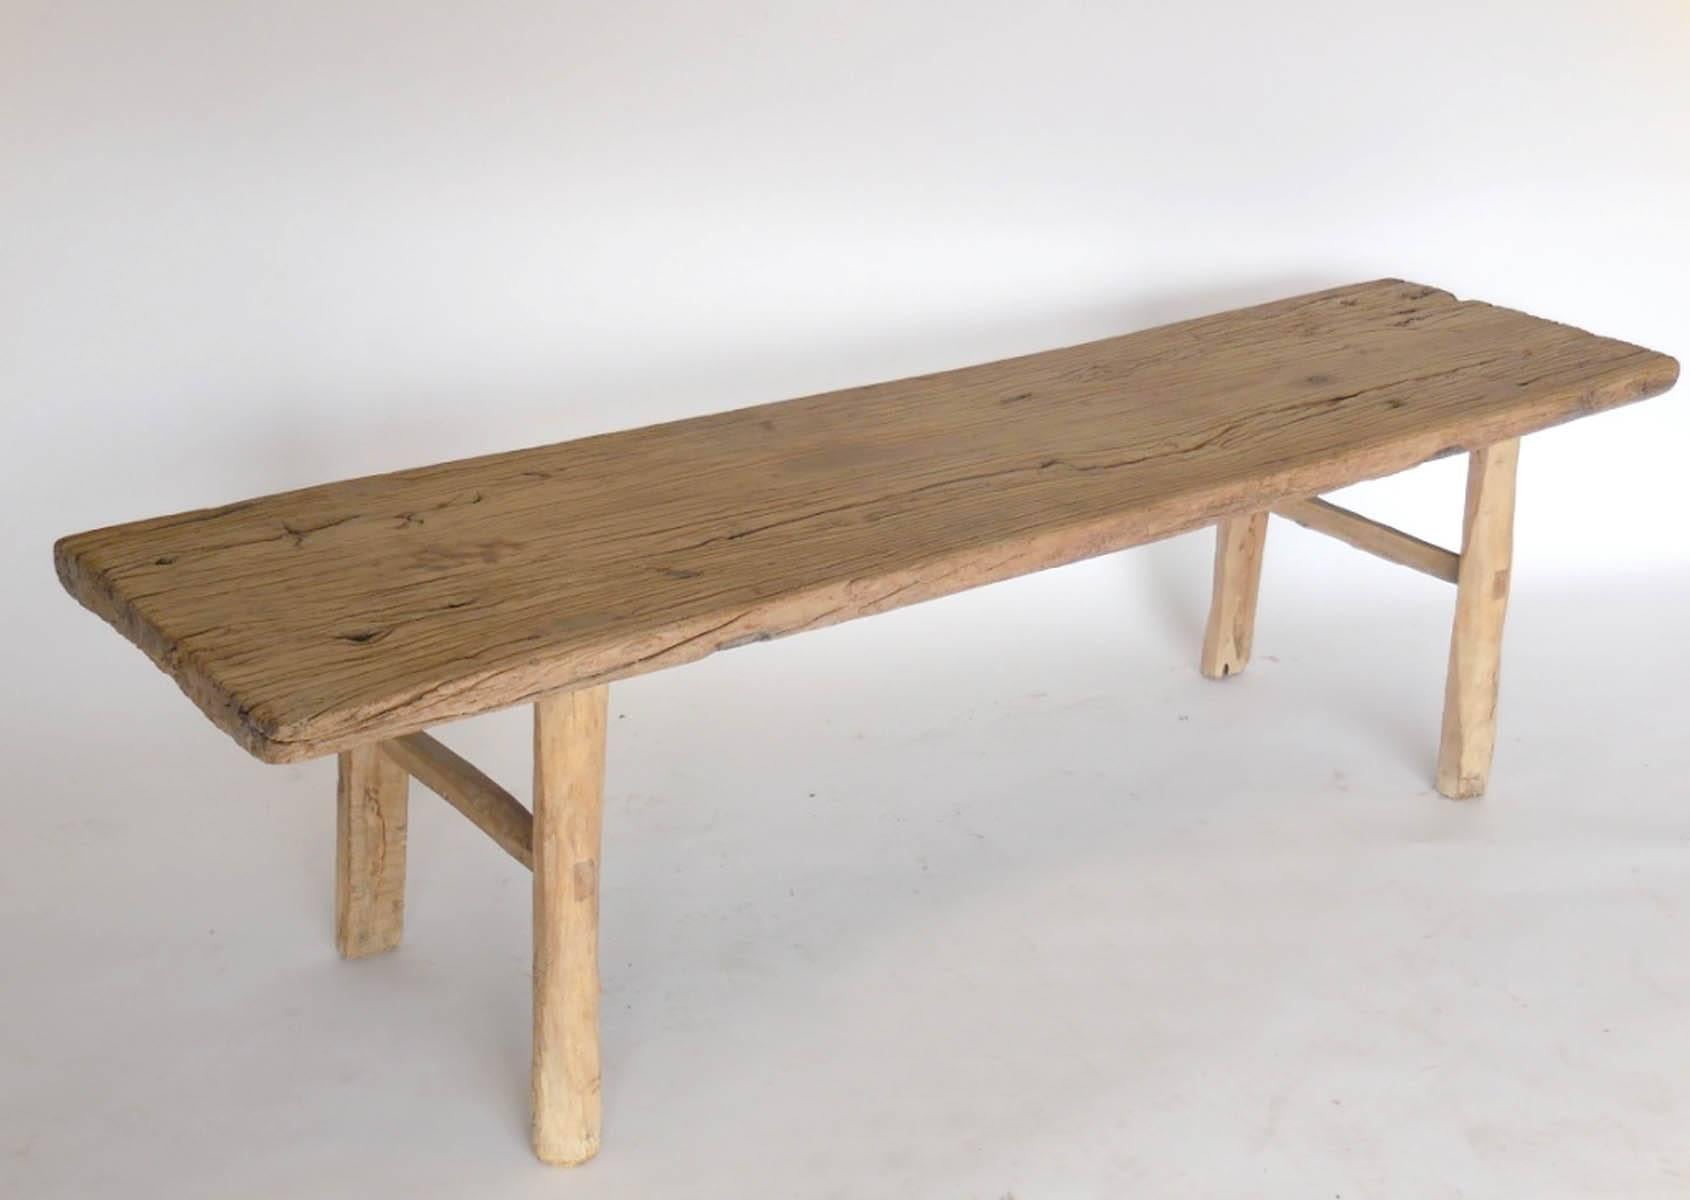 19th century one plank elmwood backless bench with two short stretchers. Lovely wood with smooth patina.